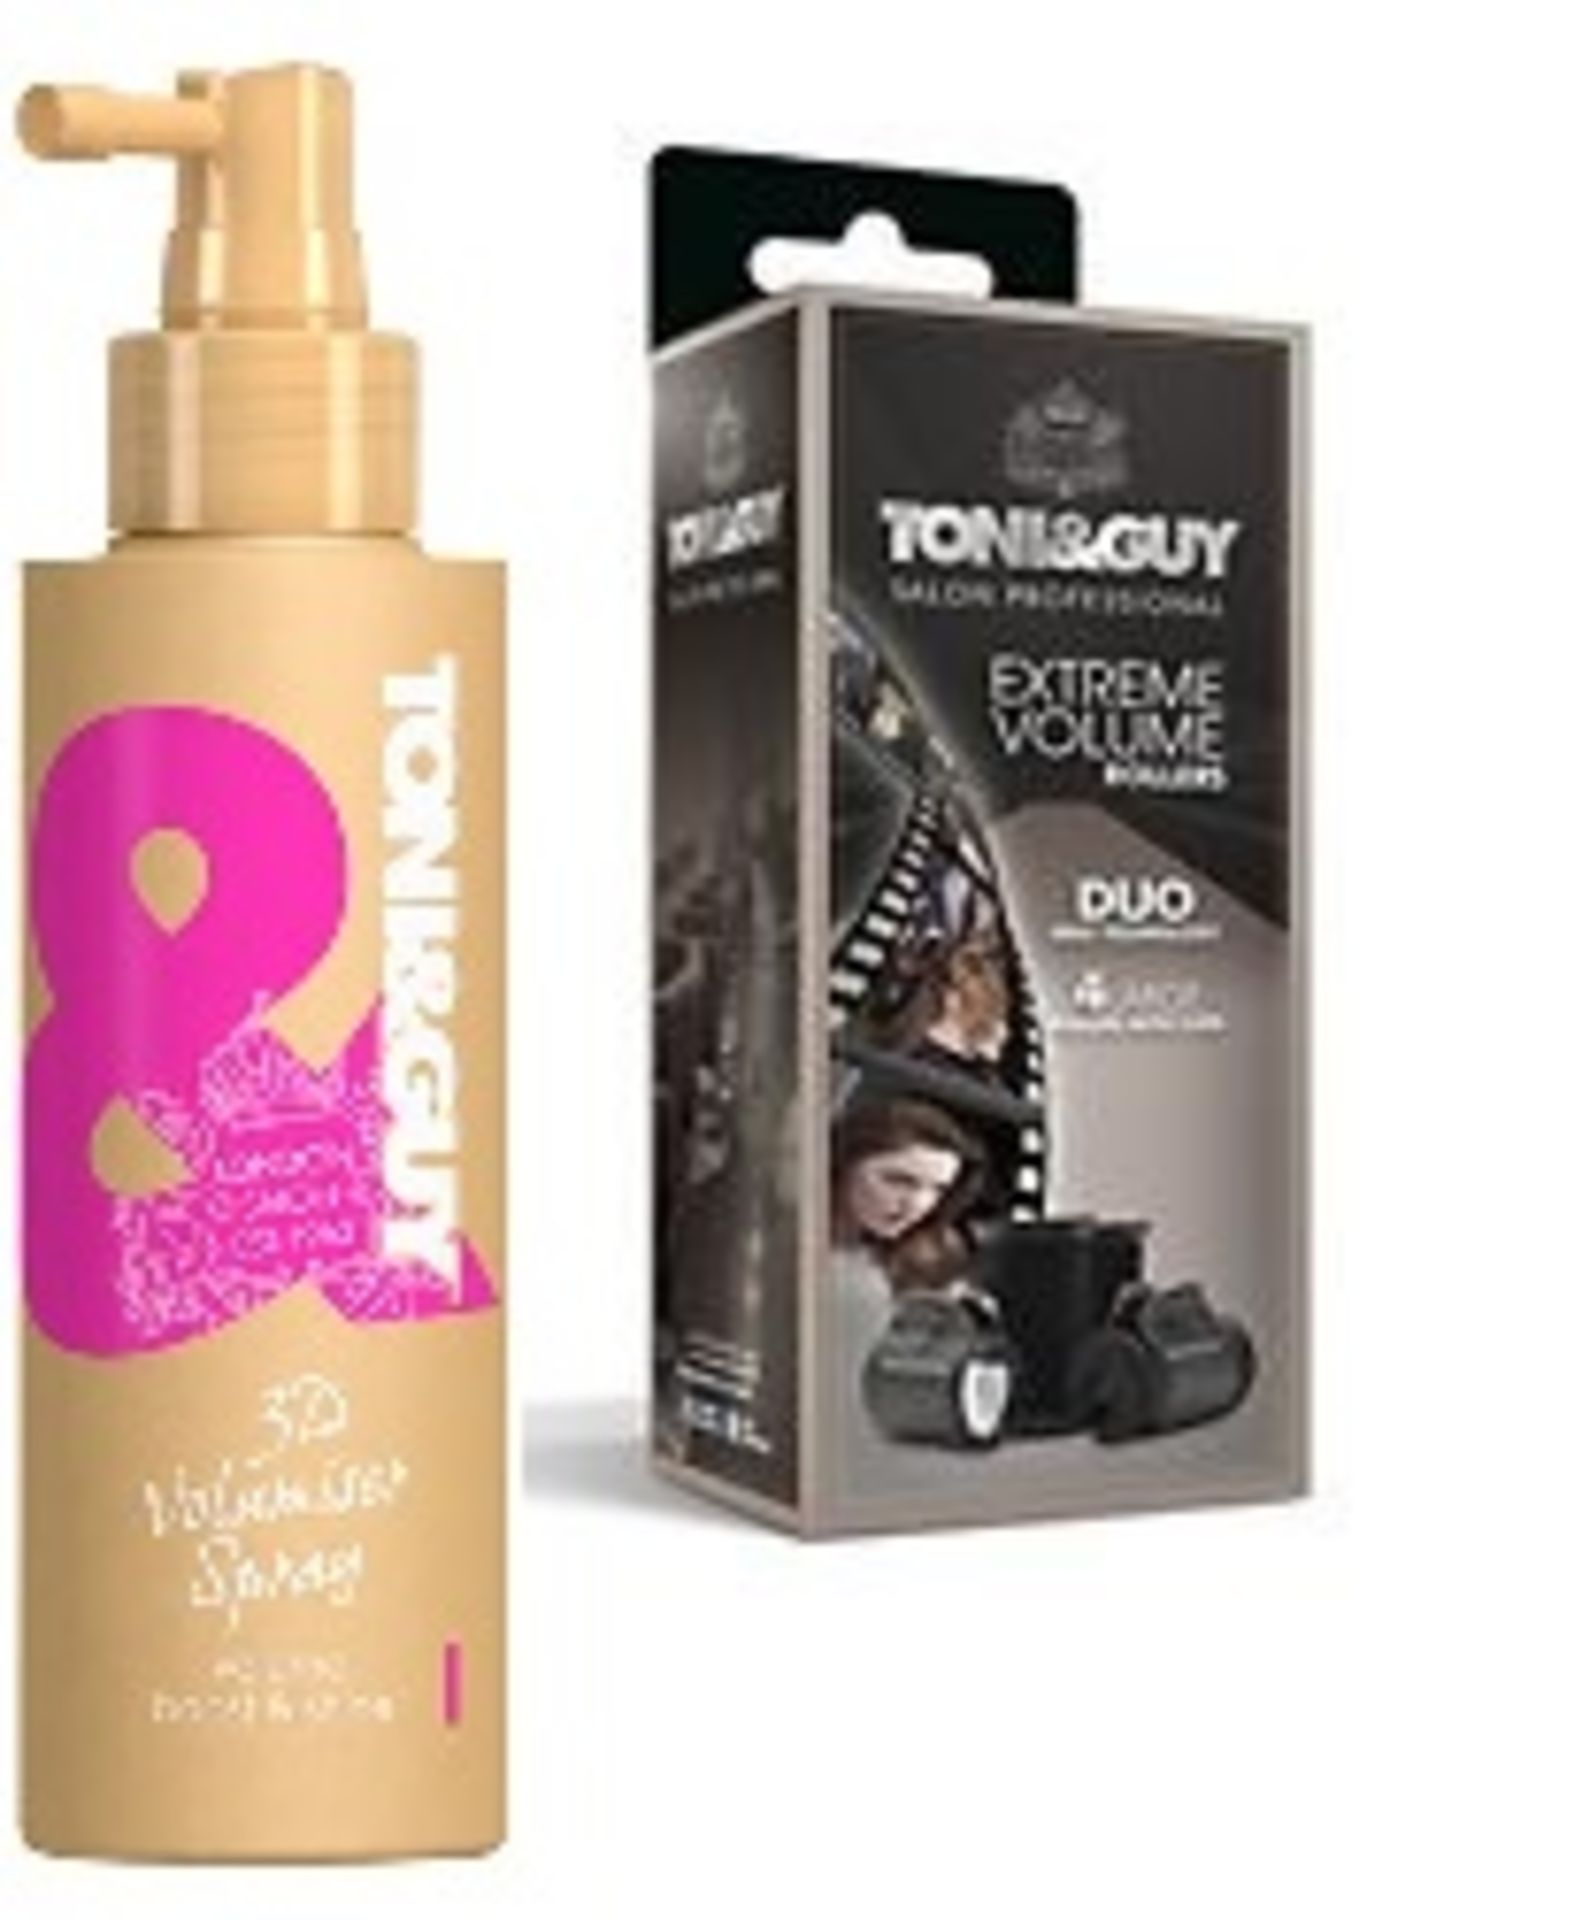 V *TRADE QTY* Brand New Toni & Guy Salon Professional Extreme Volume Rollers - 4 Large Rollers - Image 2 of 3